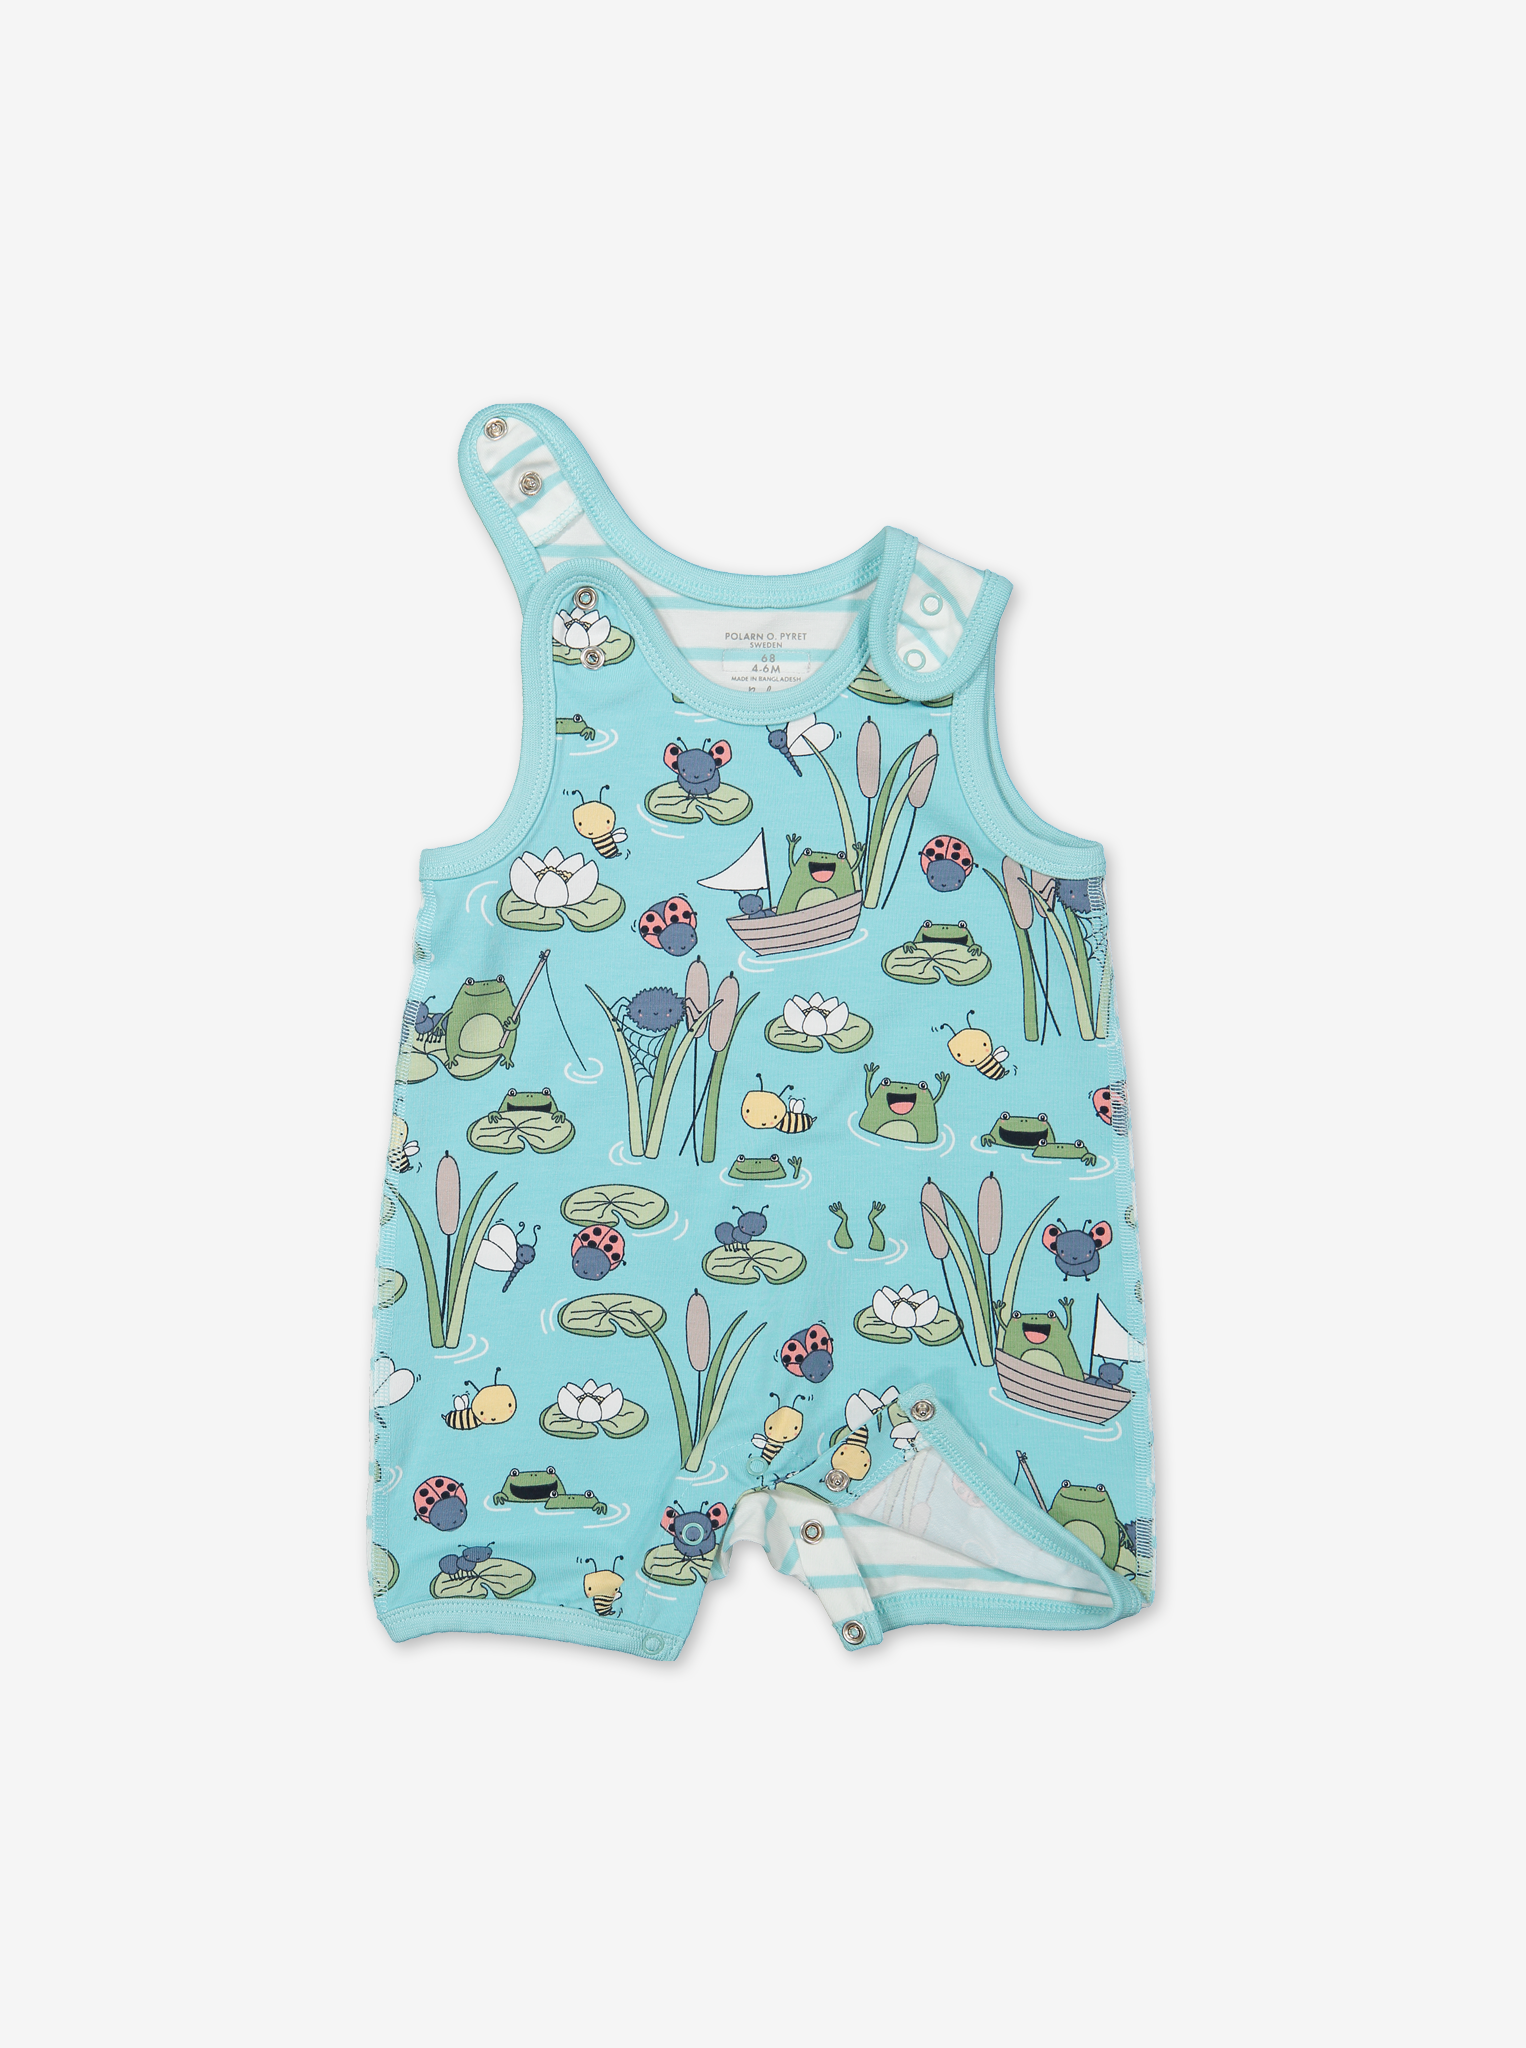 Pond Print Baby Playsuit-Unisex-0-1y-Turquoise